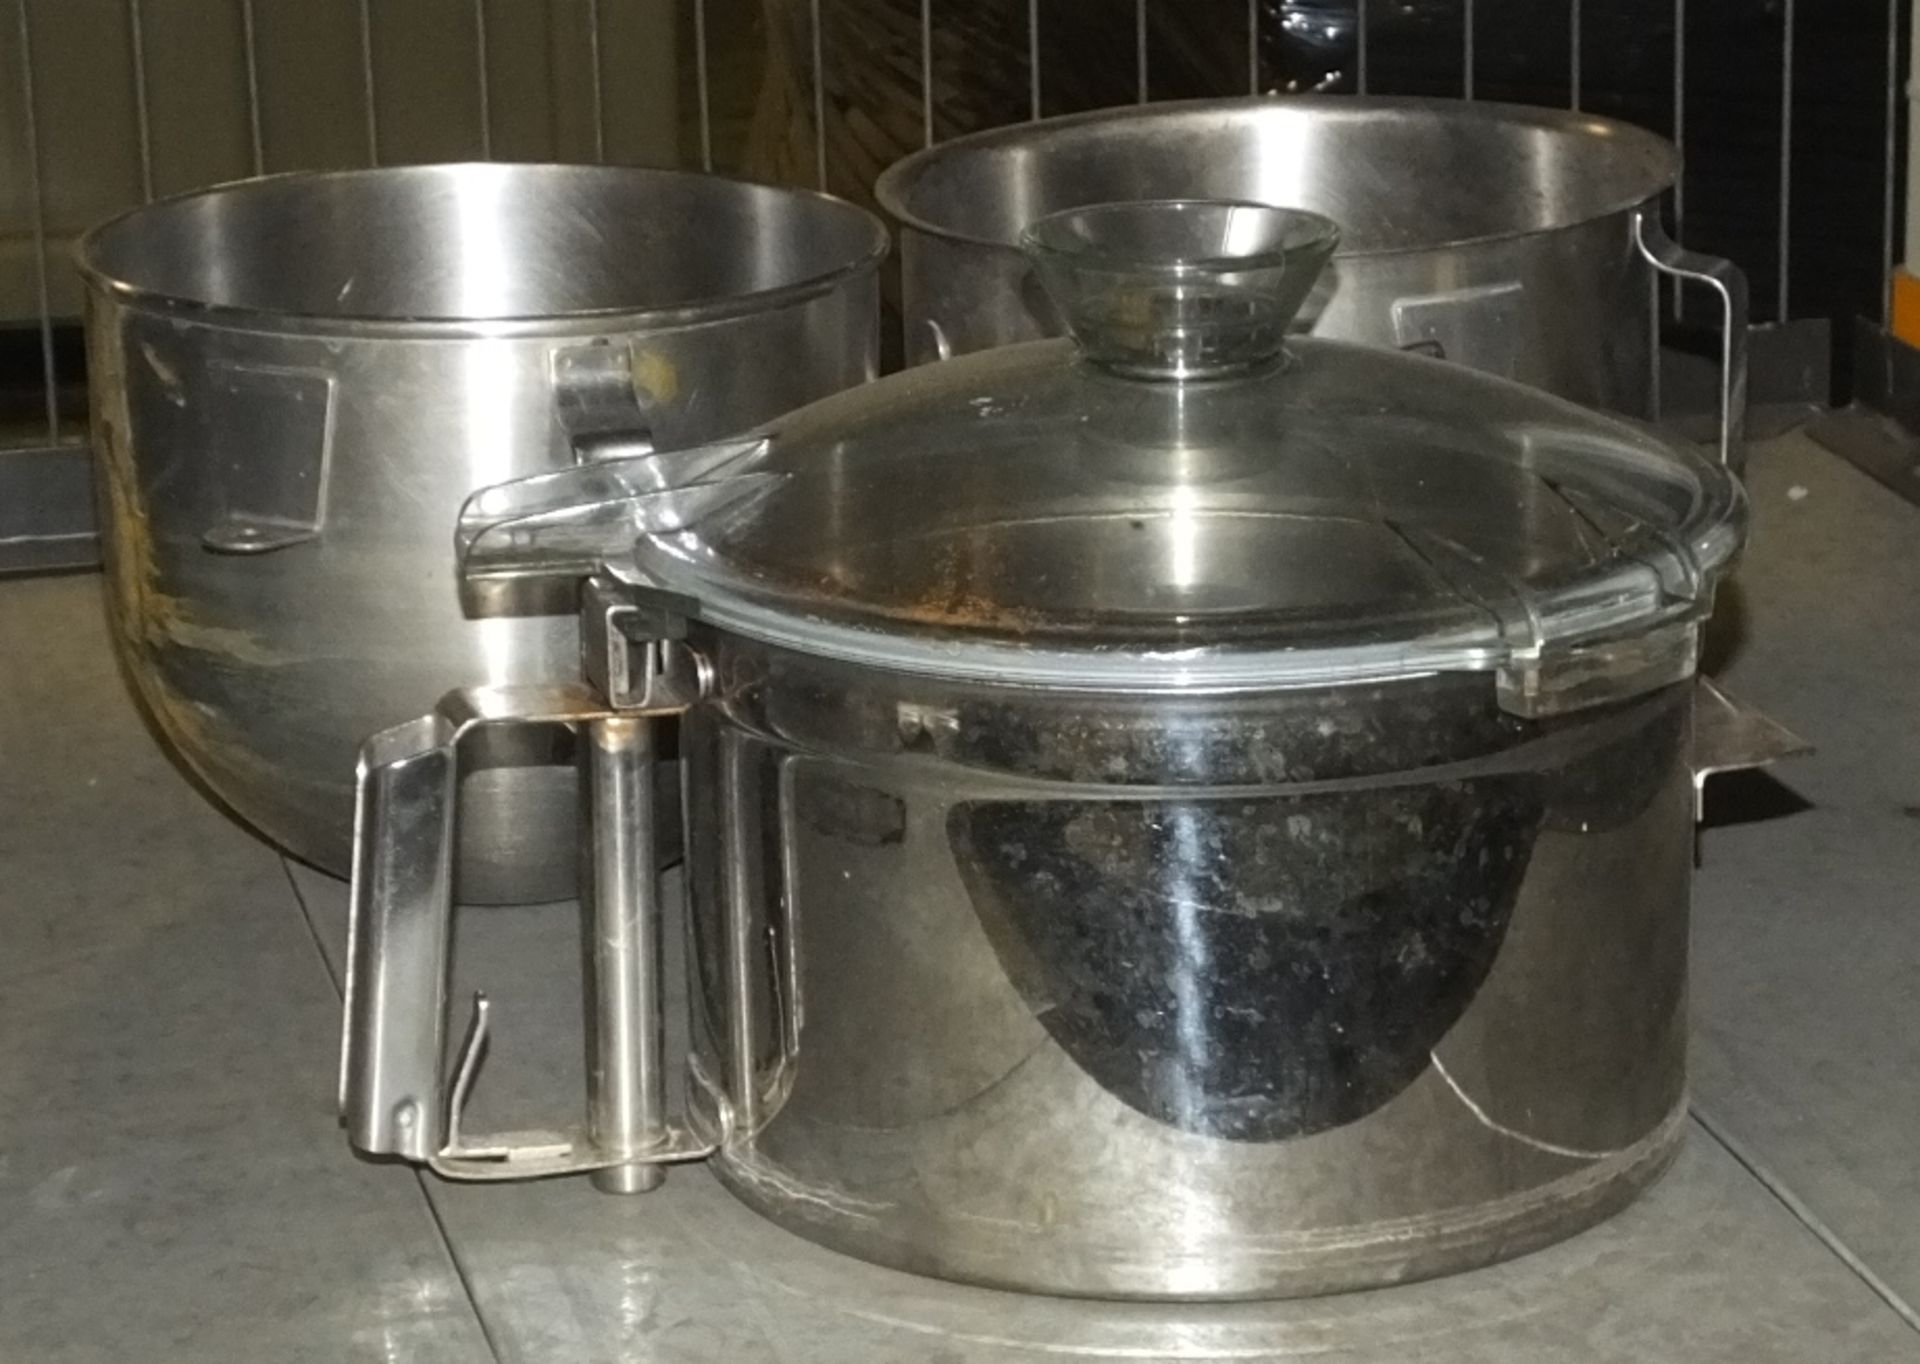 Catering Equipment - Mixer Bowls & Hook - Image 4 of 4